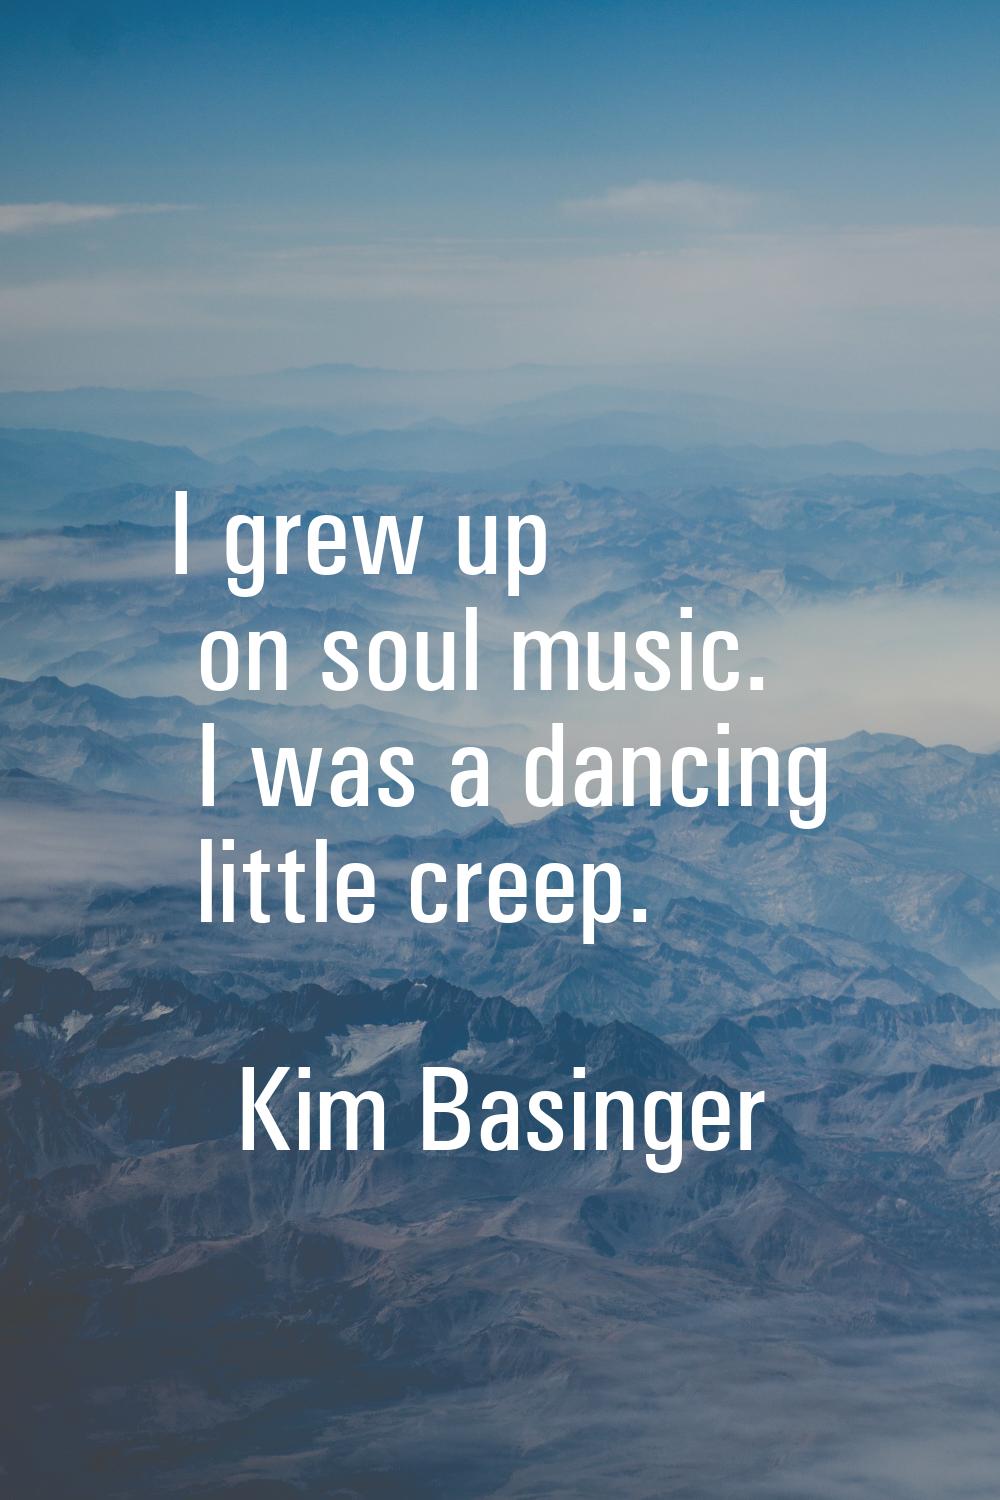 I grew up on soul music. I was a dancing little creep.